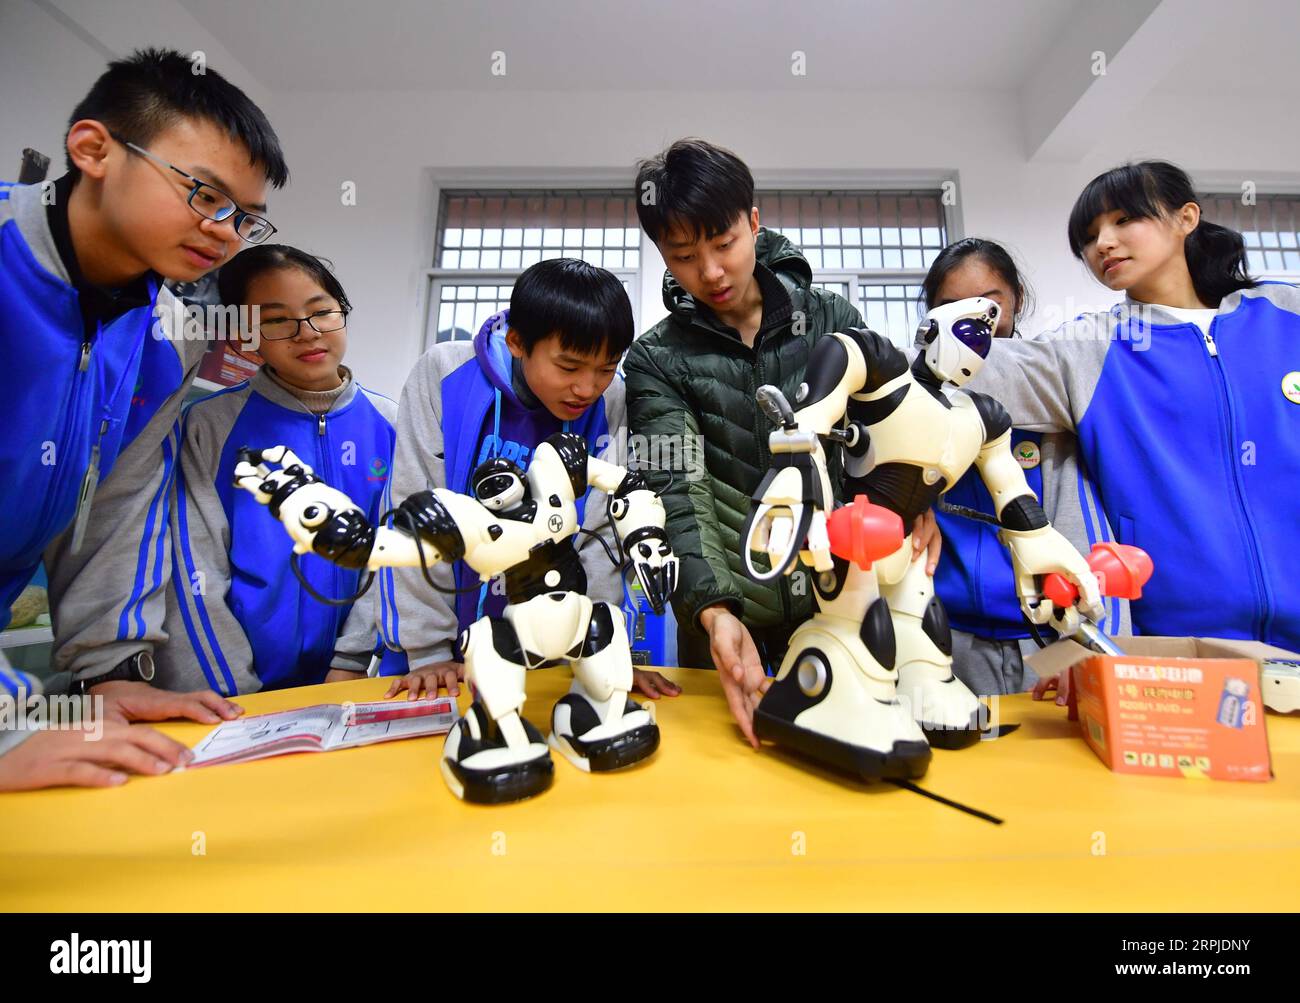 191206 -- RONGSHUI, Dec. 6, 2019 -- Guo Haokun 3rd R, a postgraduate student of Northwestern Polytechnical University NPU who volunteers here as a physics teacher, gives a class at a minority middle school in Rongshui Miao Autonomous County, south China s Guangxi Zhuang Autonomous Region, Dec. 5, 2019. Rongshui is among the 20 deeply impoverished counties in south China s Guangxi. Off its 115 poor villages, 73 are deeply impoverished. Since 2015, the NPU has launched educational assistance to the county where education level is low. Relying on its S&T as well as educational resources, the NPU Stock Photo